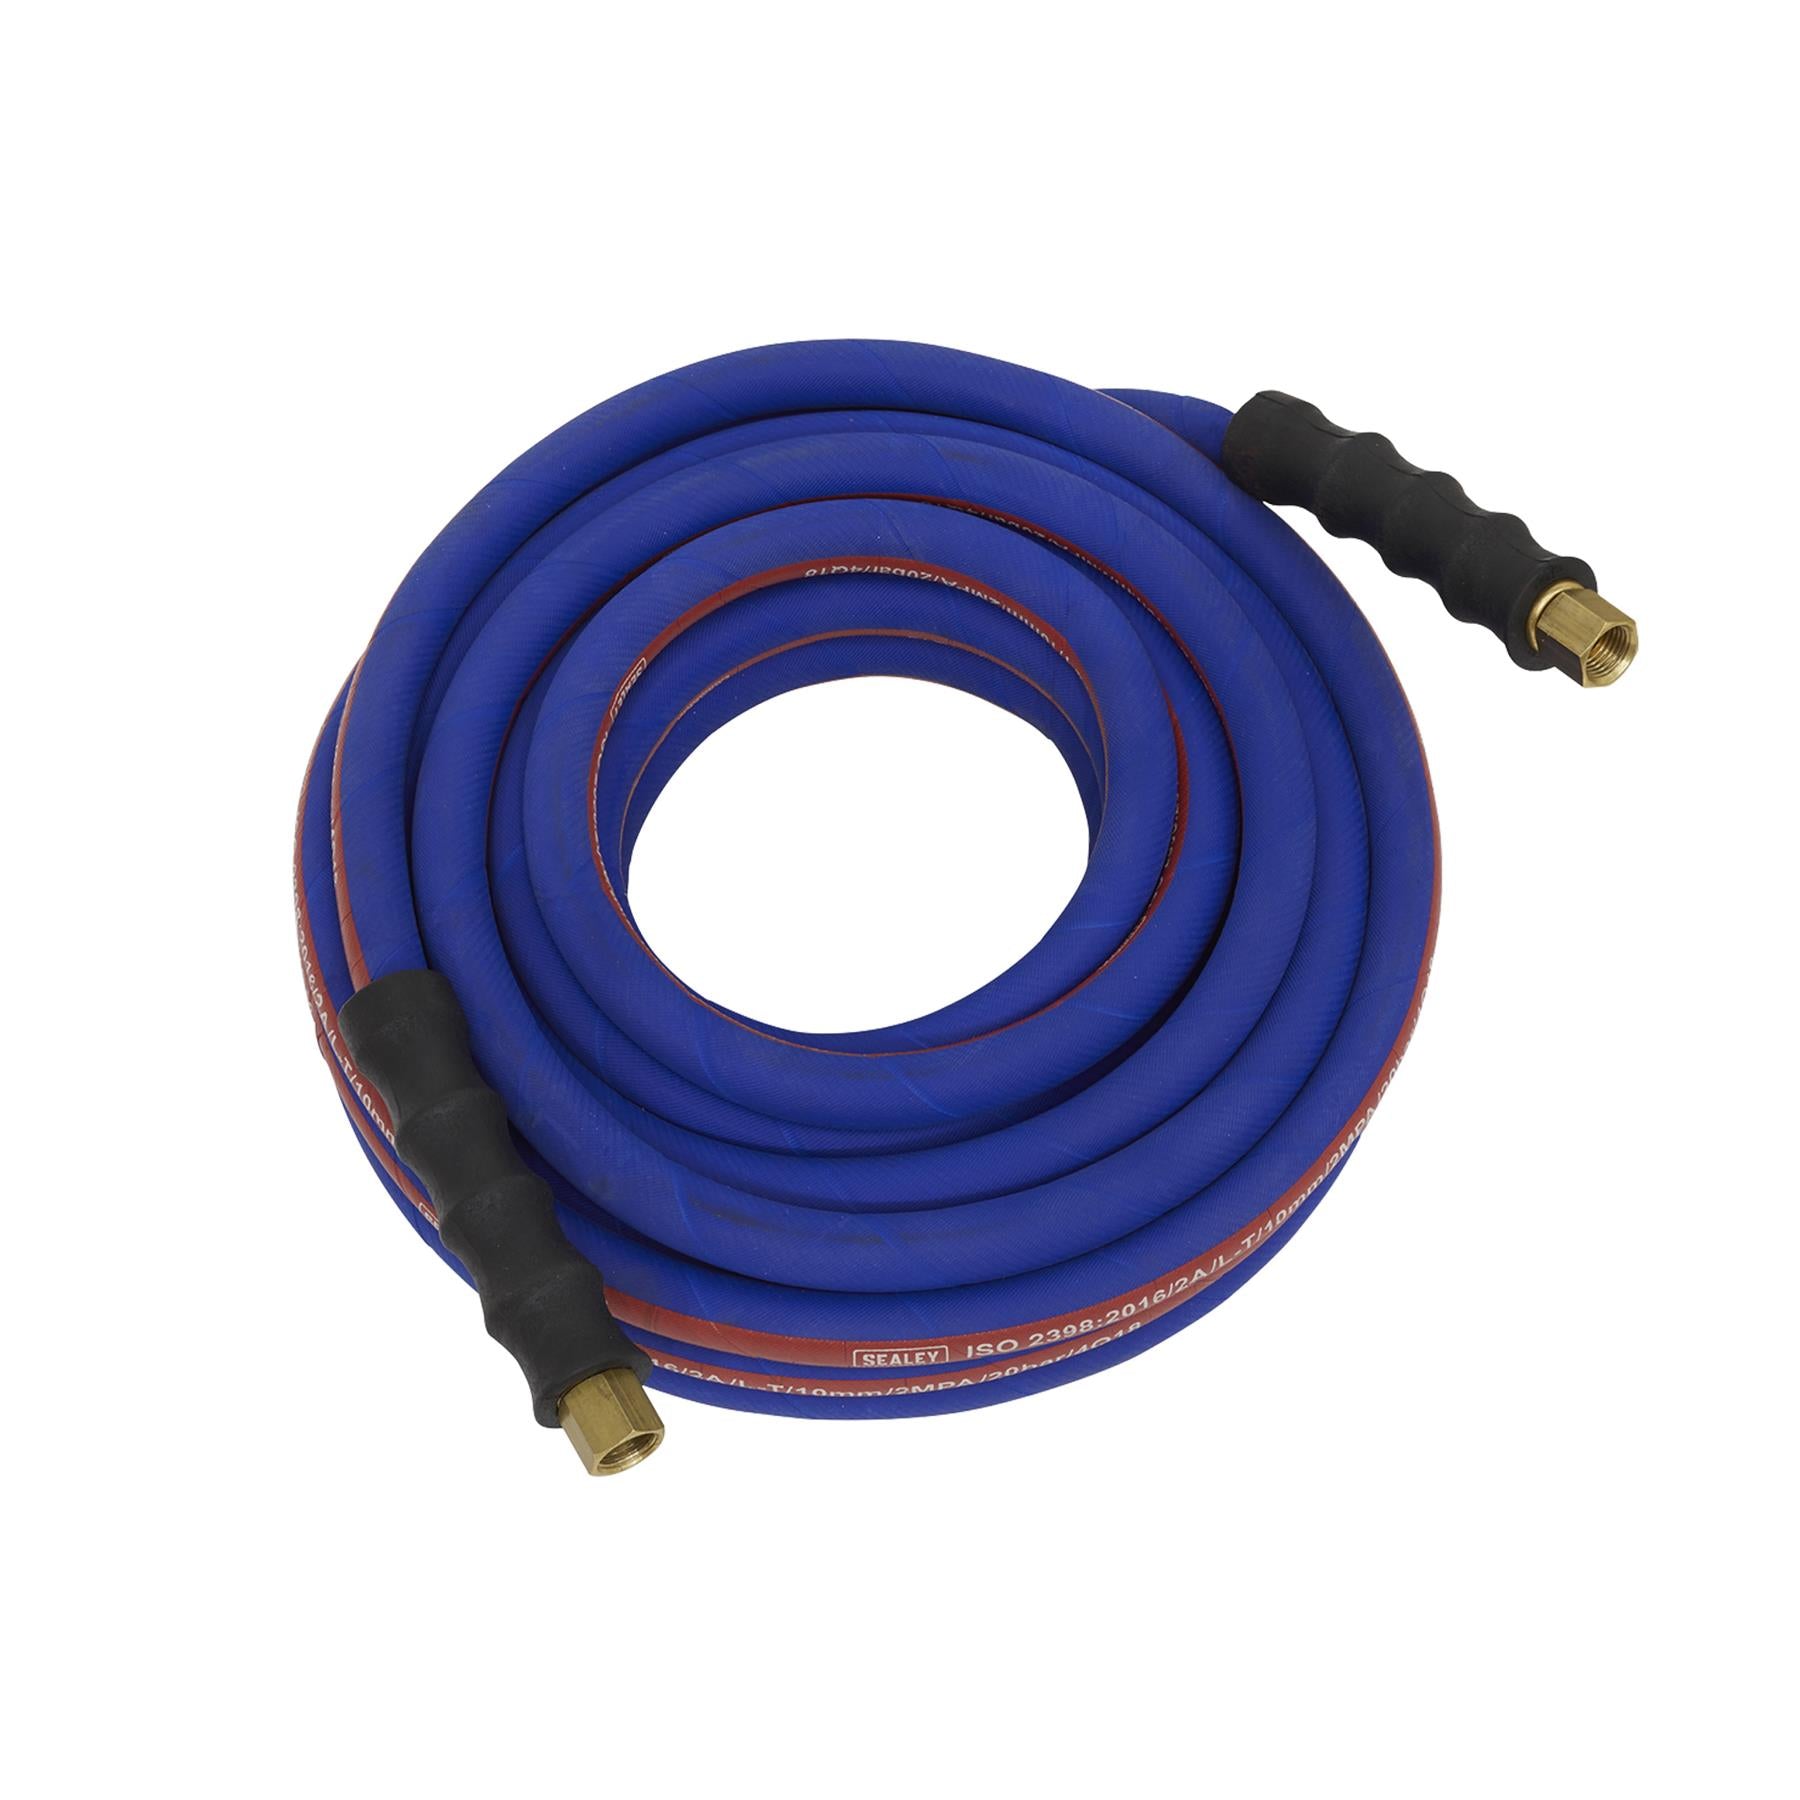 Sealey Air Compressor Hose 10m x Ø10mm with 1/4"BSP Unions Extra-Heavy-Duty